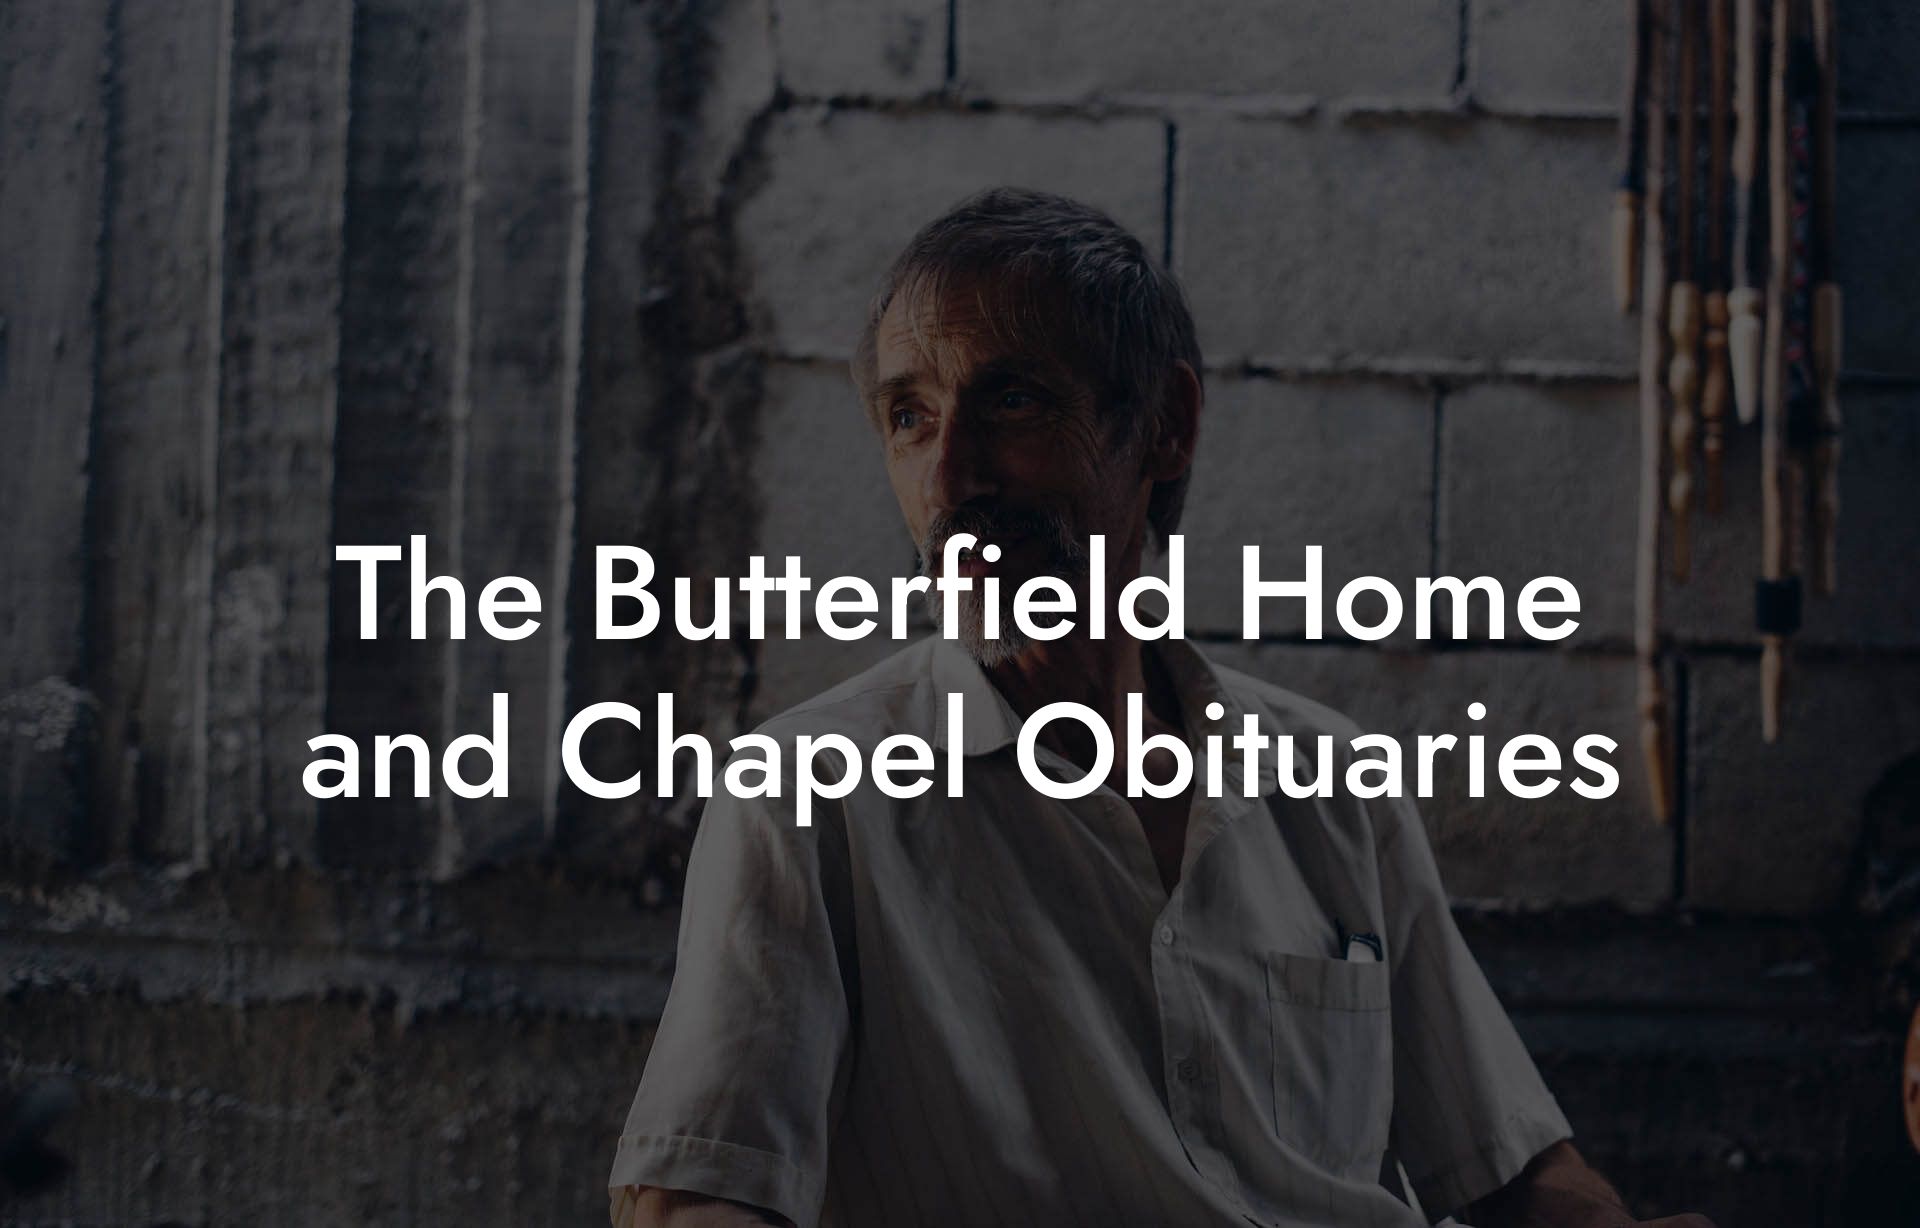 The Butterfield Home and Chapel Obituaries